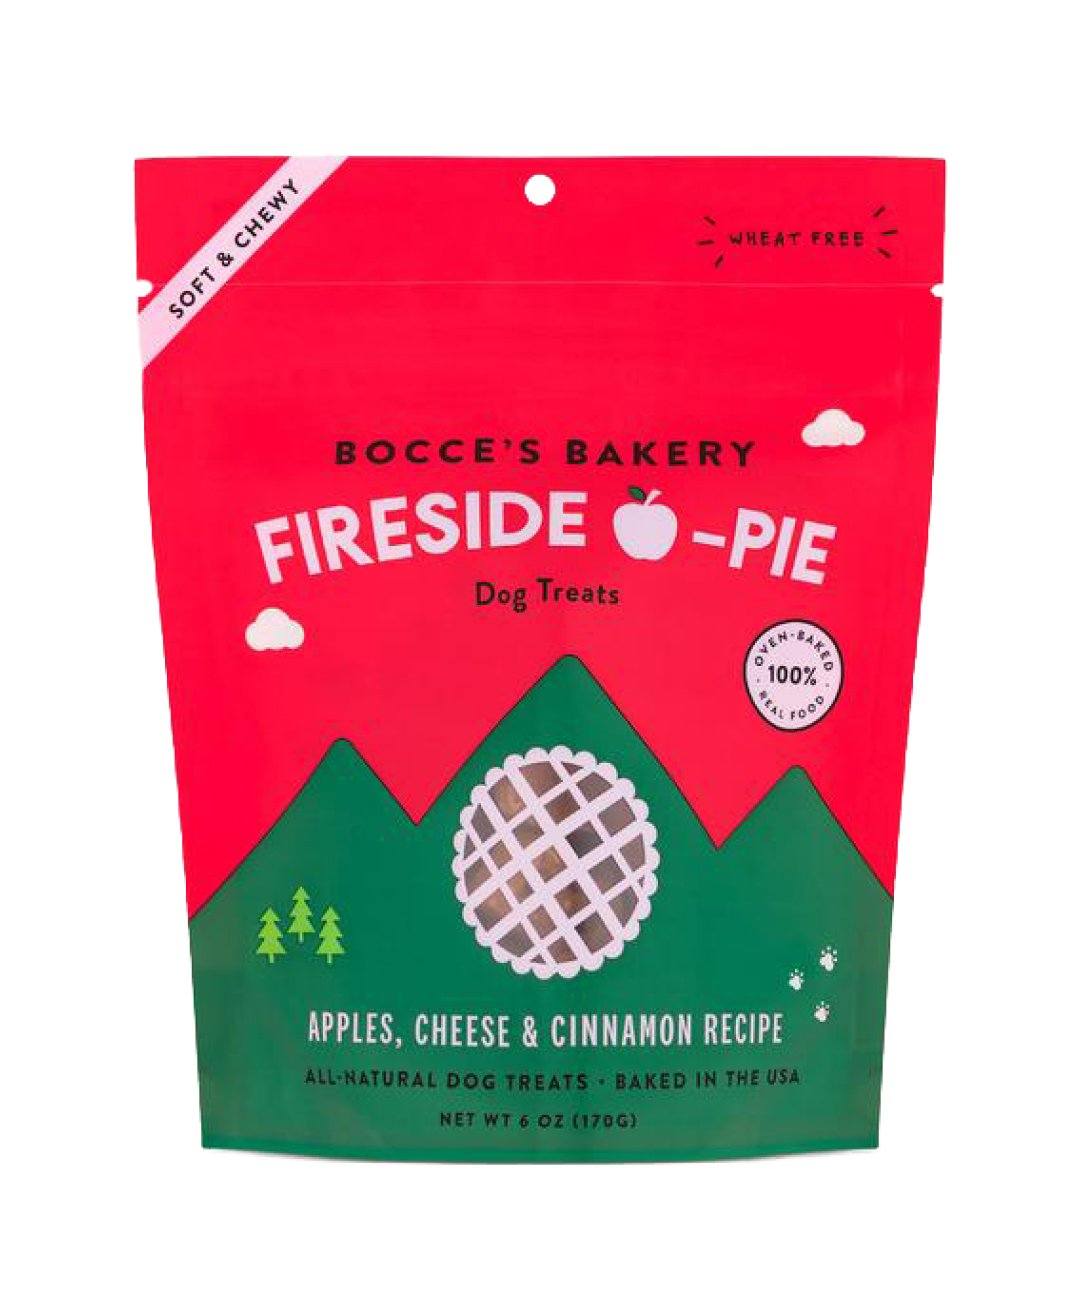 Bocce’s Fireside Apple Pie Soft & Chewy Treats Dog Treats Rover 